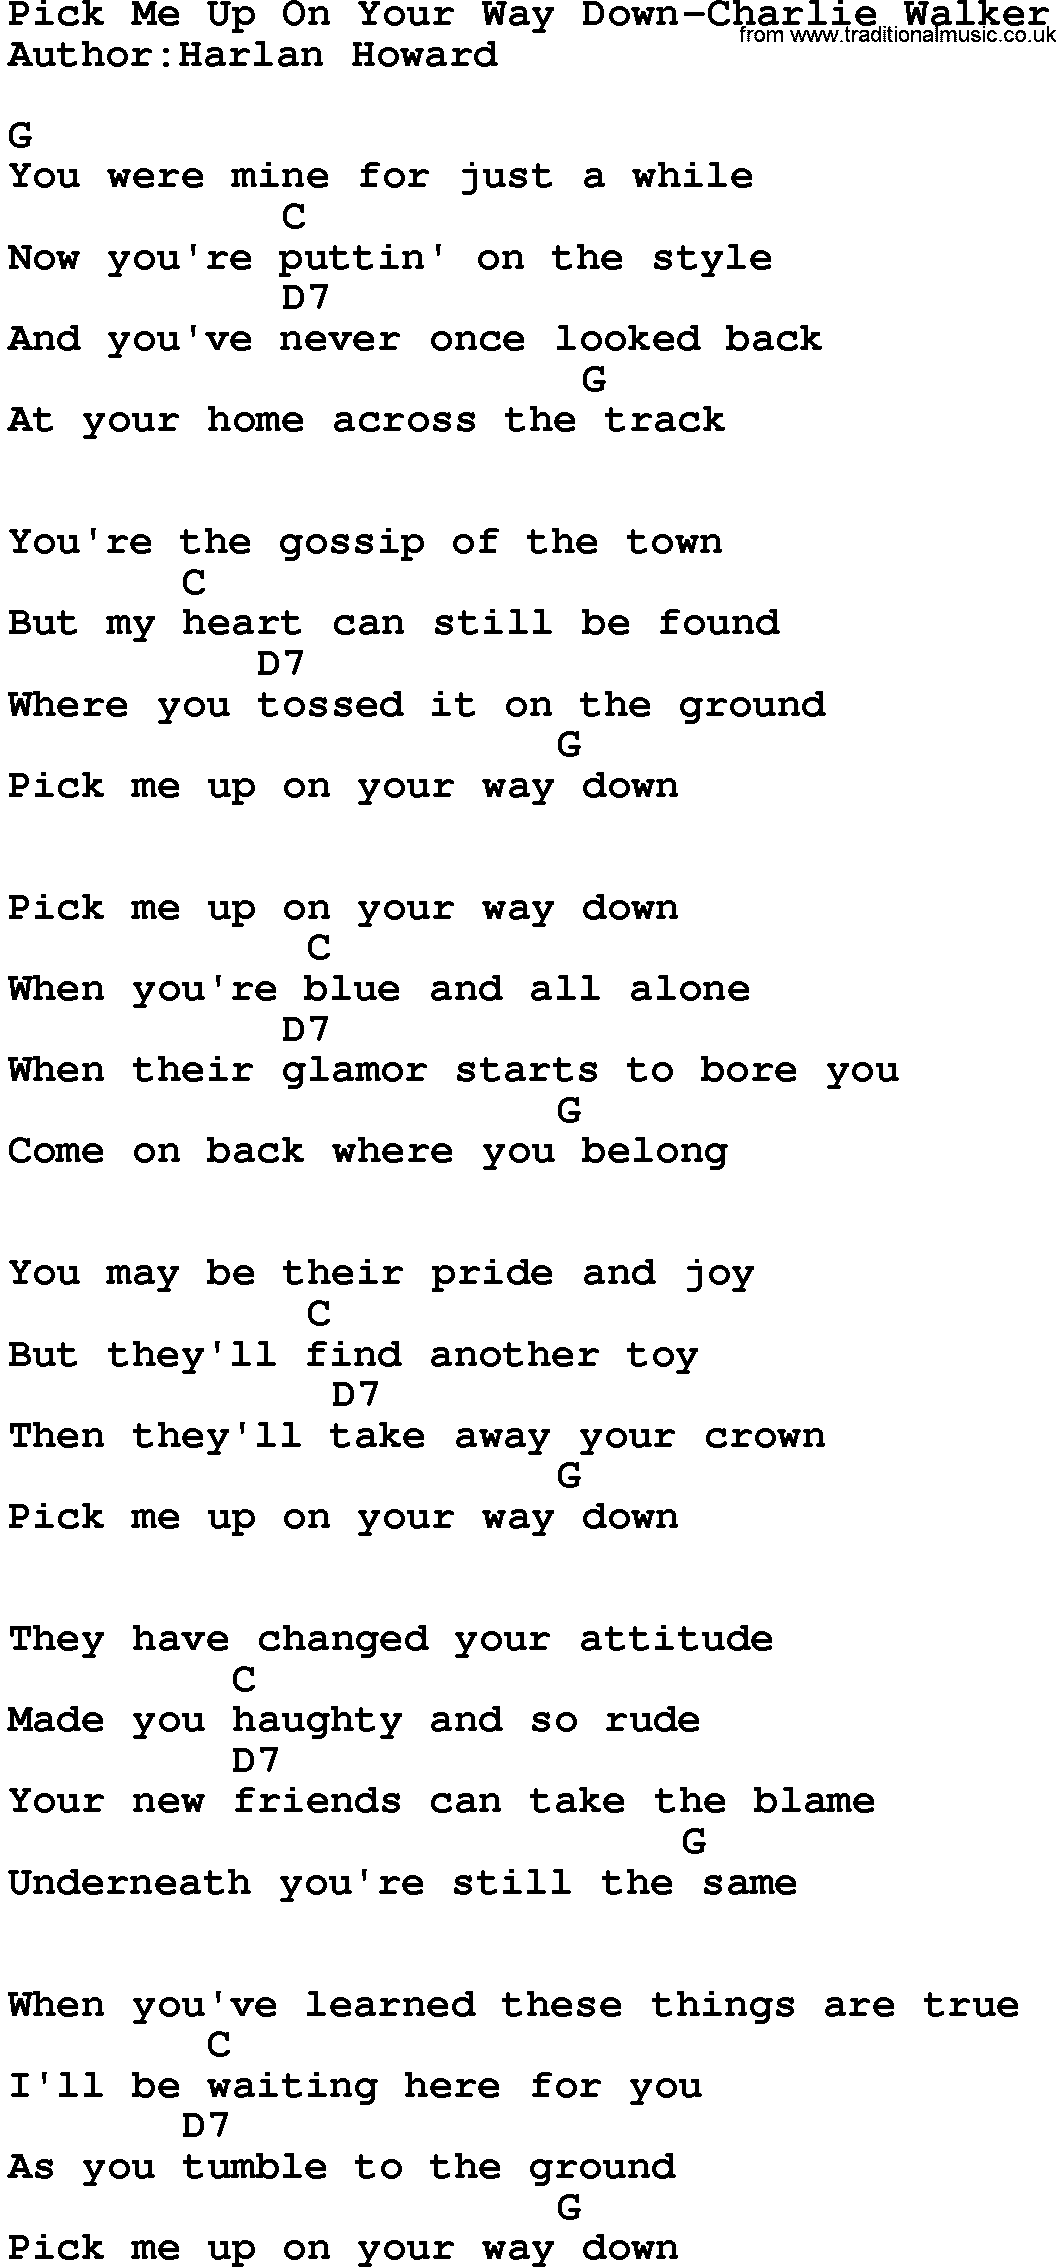 Country music song: Pick Me Up On Your Way Down-Charlie Walker lyrics and chords